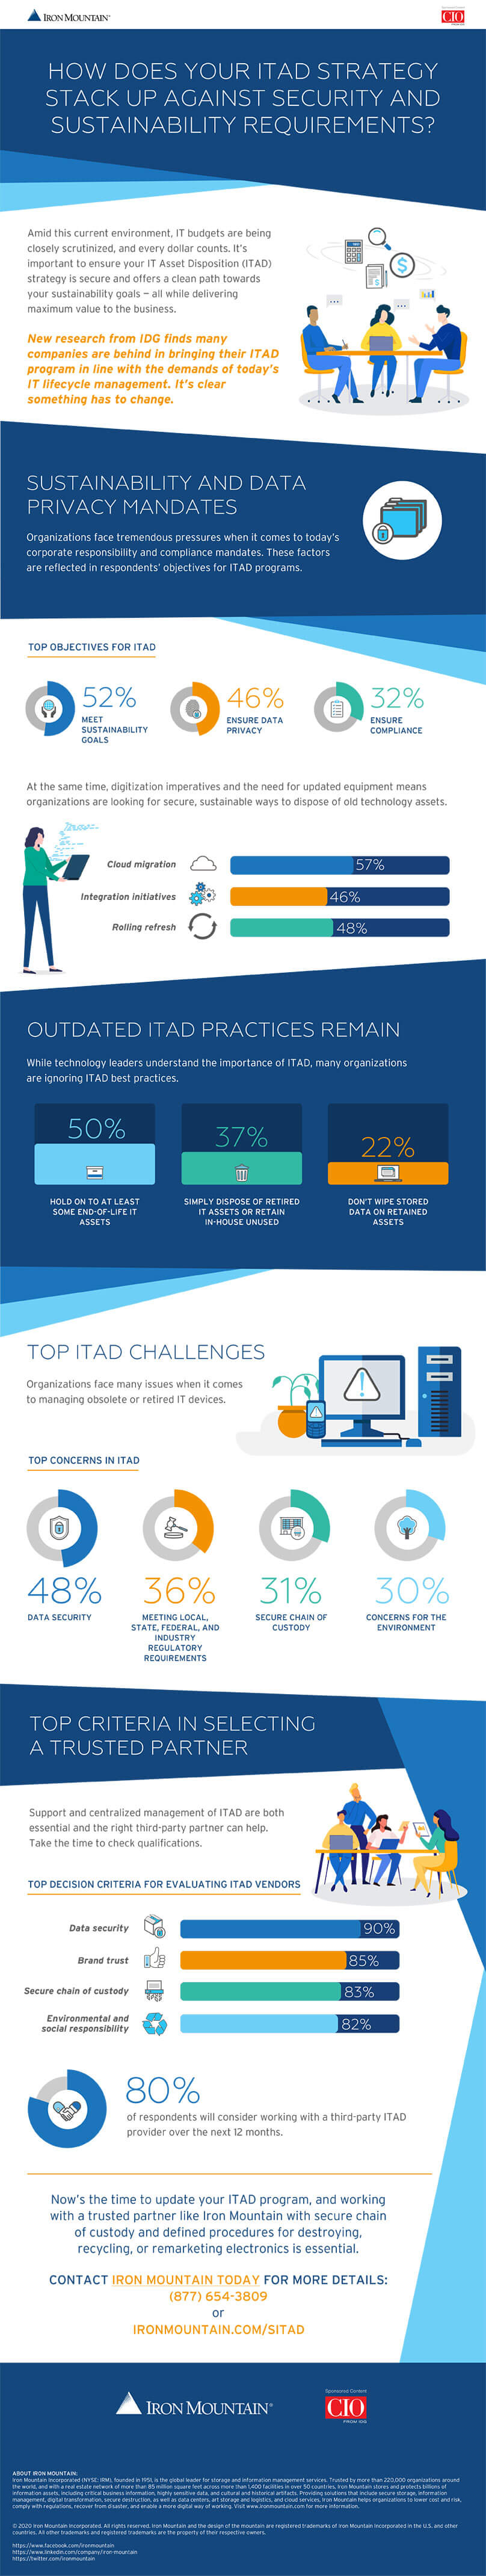 IDG research: ITAD strategy vs. Security and sustainability requirements